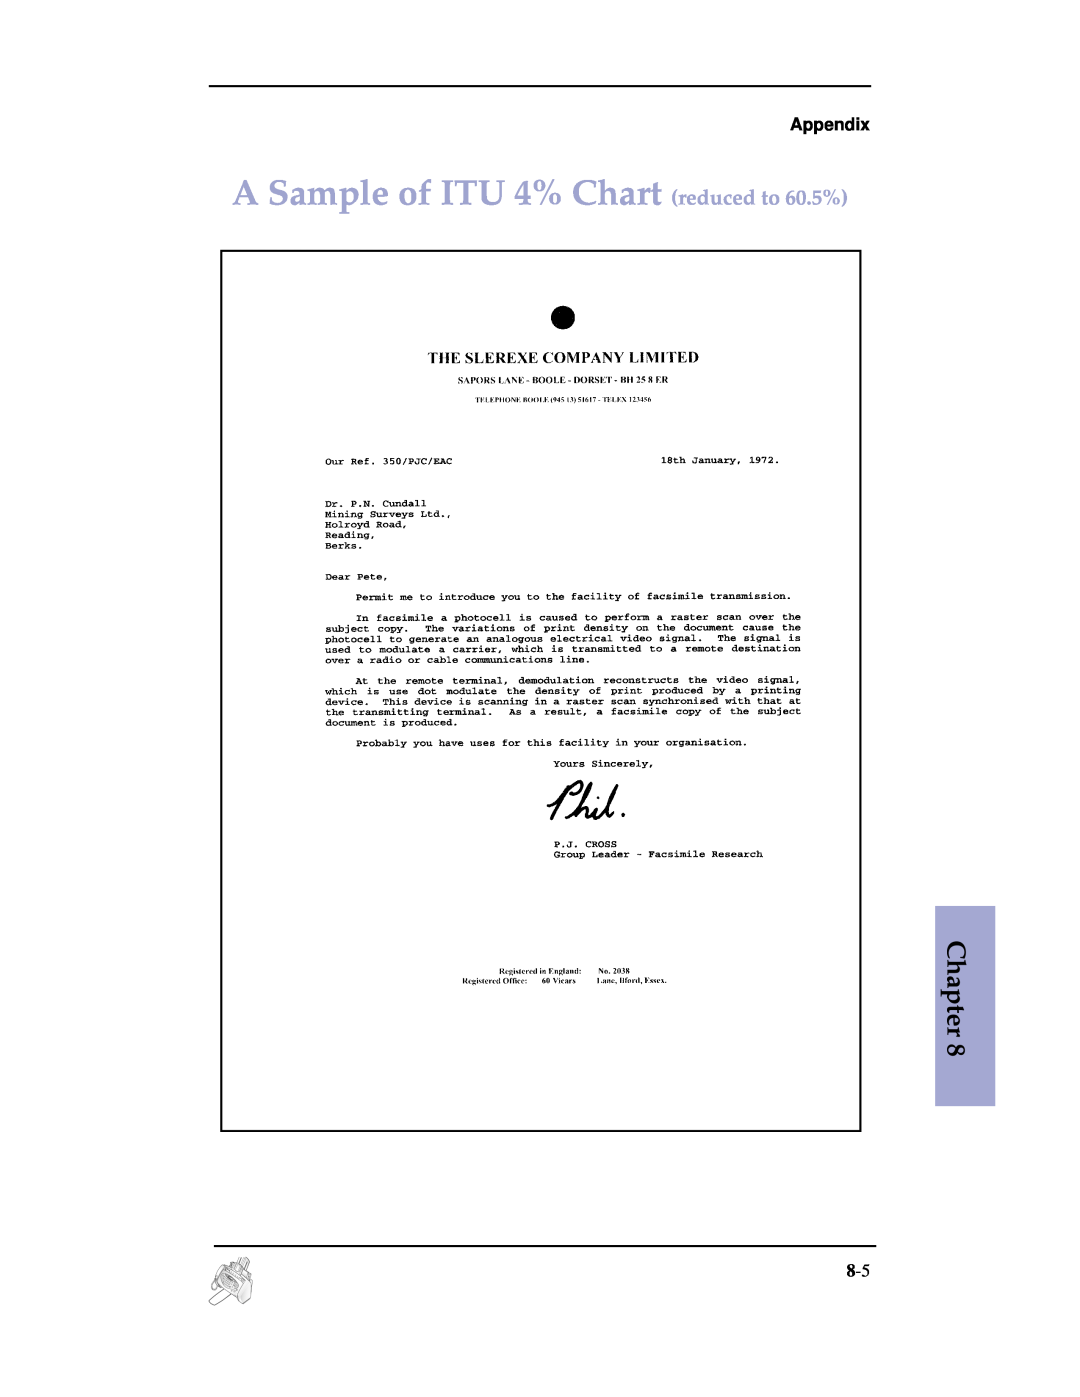 Samsung SF-3100 manual A Sample of ITU 4% Chart reduced to 60.5%, Chapter, Appendix 